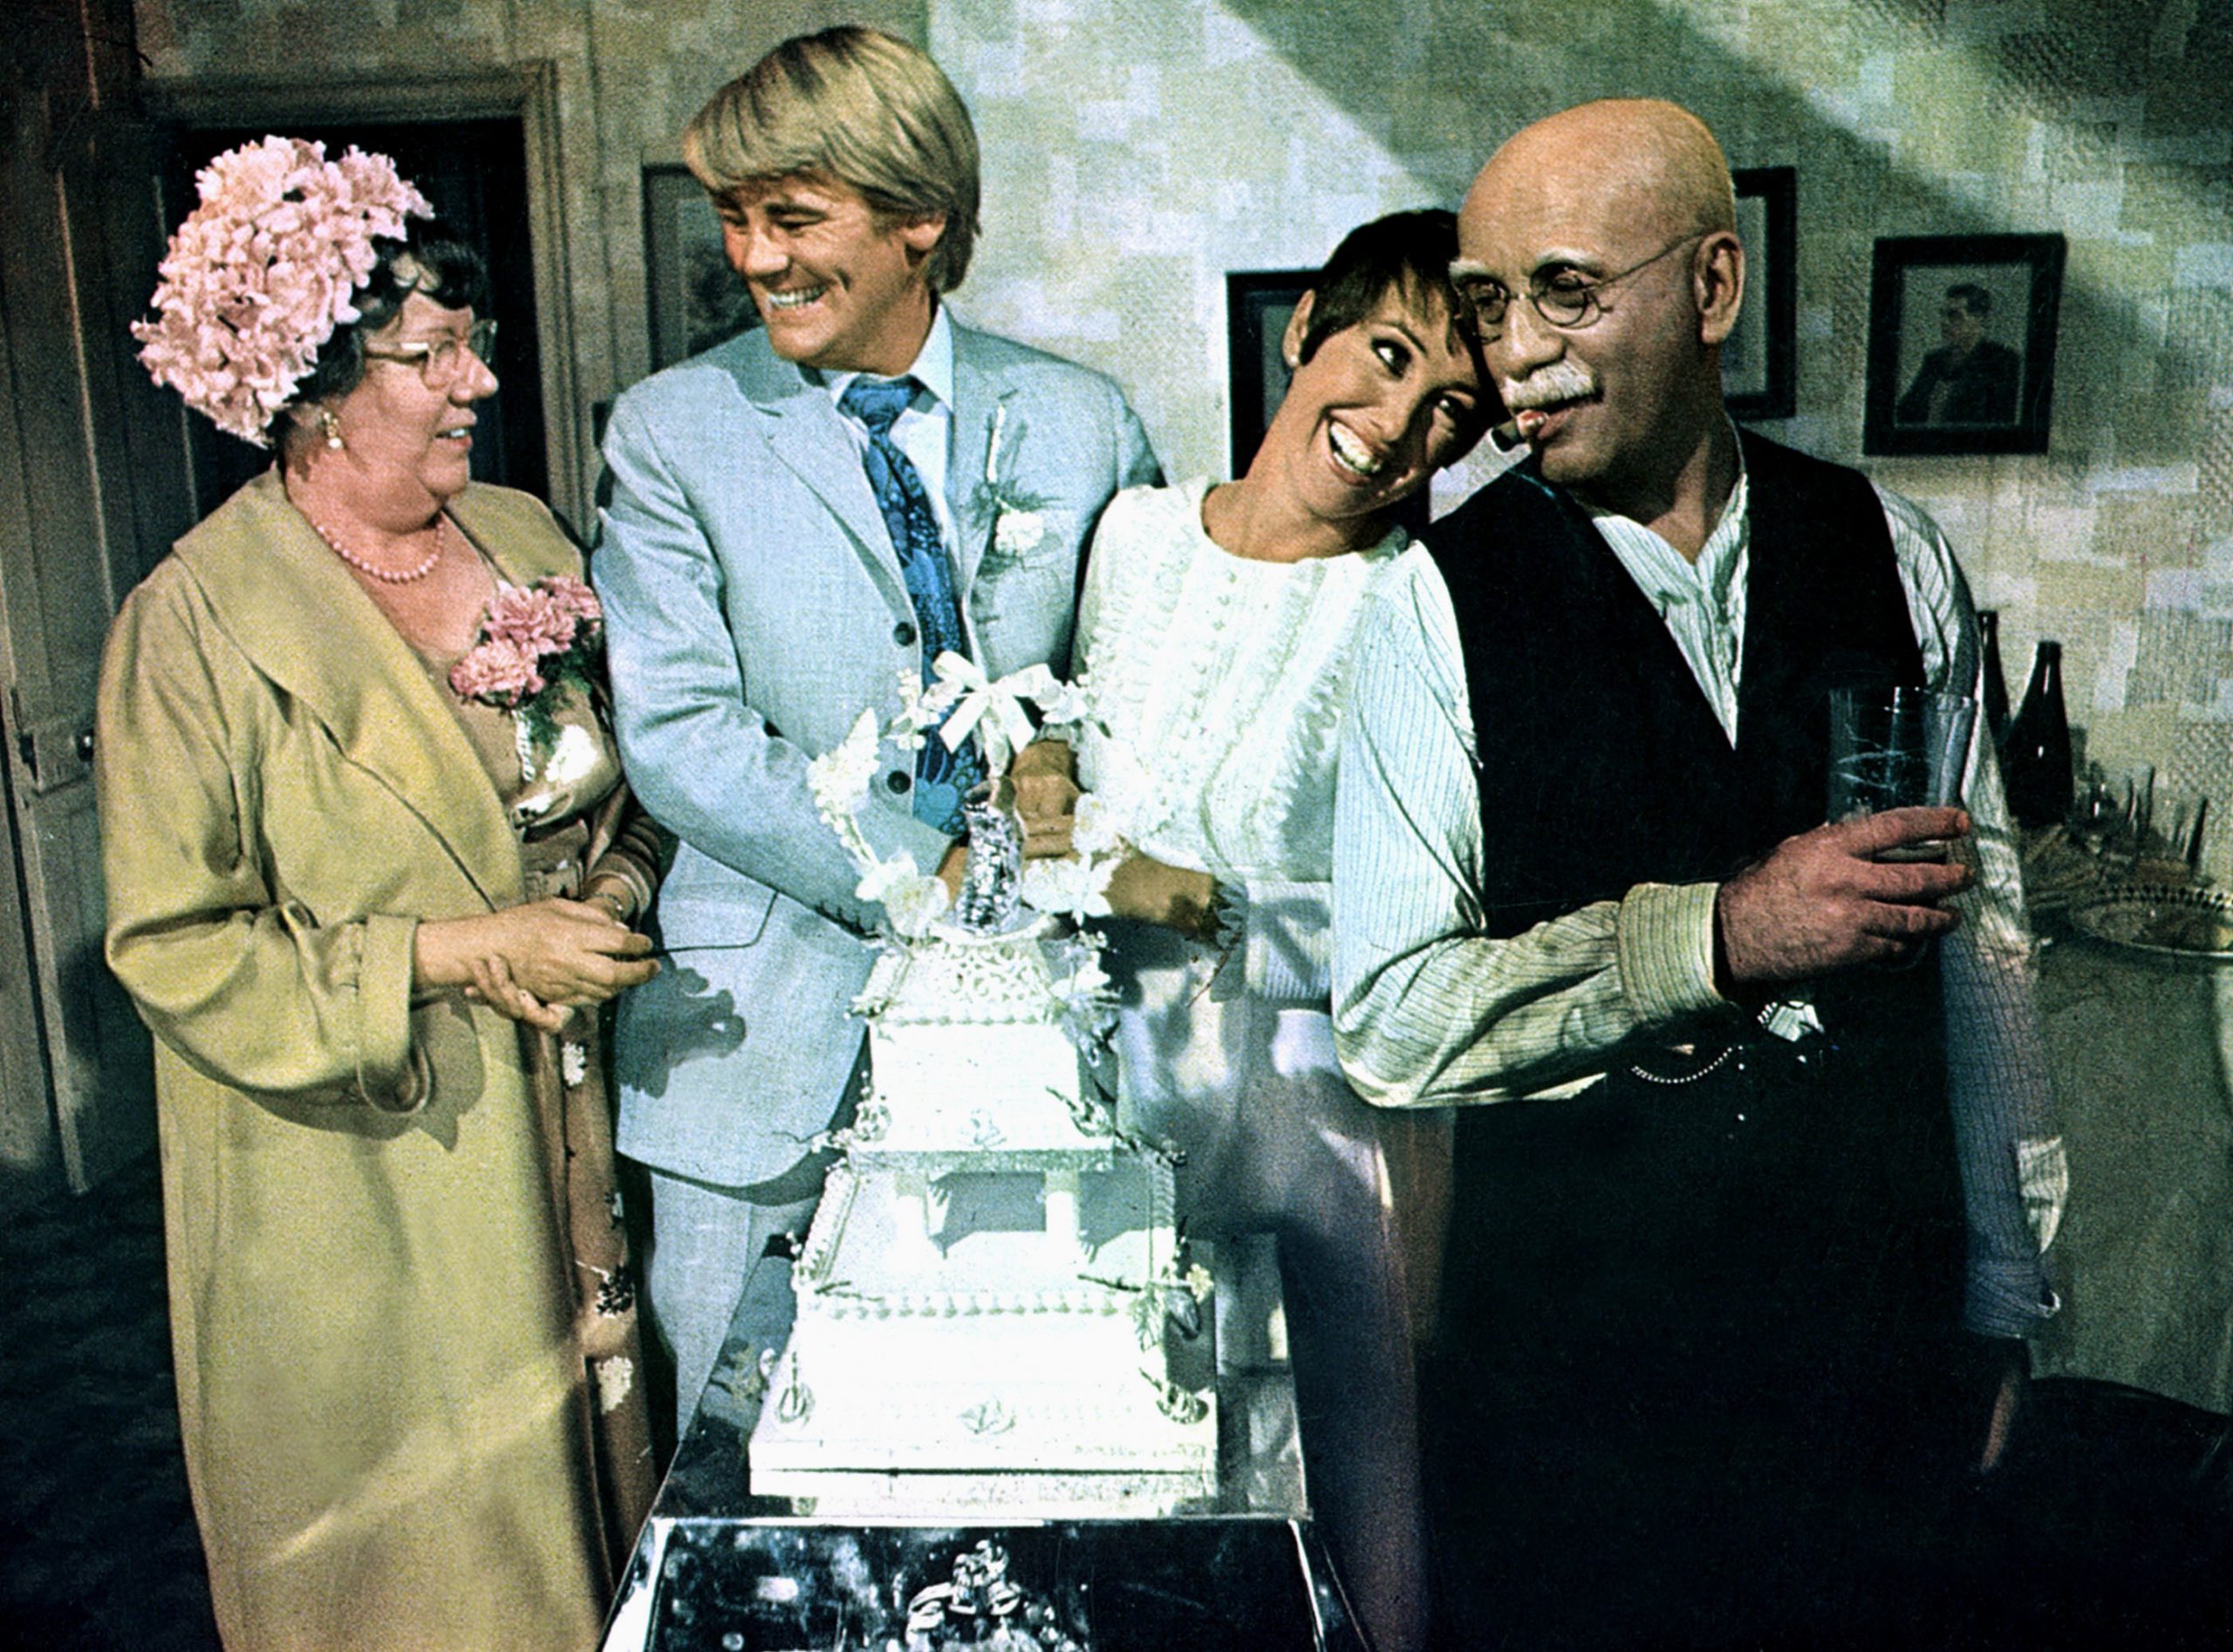 Dandy Nichols, Anthony Booth, Una Stubbs and Warren Mitchell as Alf Garnett in the highly controversial Till Death Us Do Part